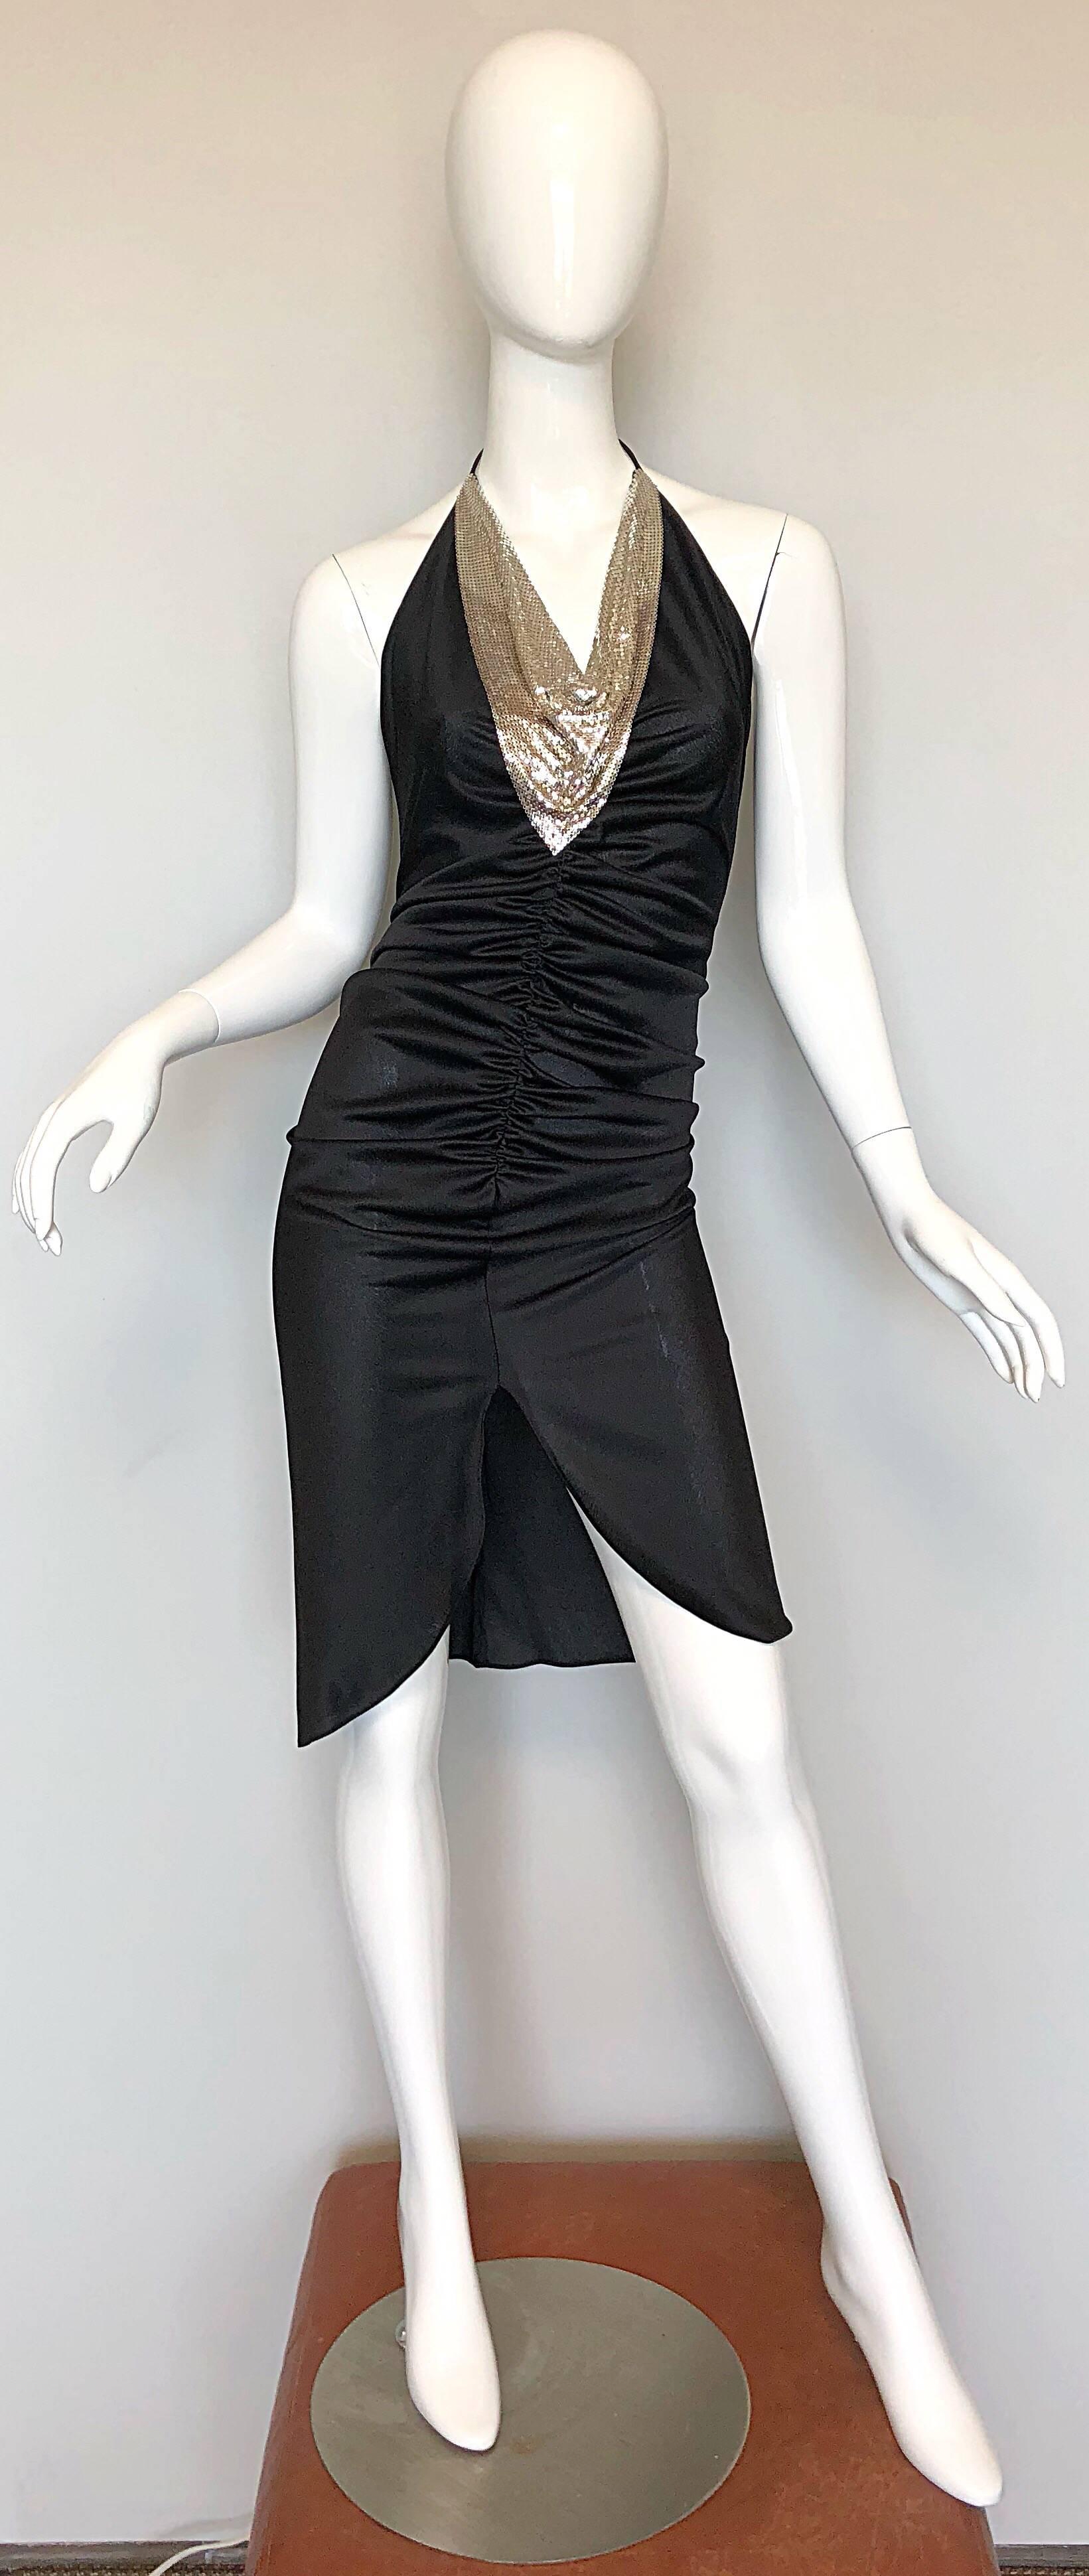 Sexy and rare early 1970s FREDERICKS OF HOLLYWOOD black and silver jersey + chainmail slinky disco halter dress! This rare gem is from the era when Frederick's was a Hollywood go-to for starlets like Farrah Fawcett, Goldie Hawn, Sophia Loren, and